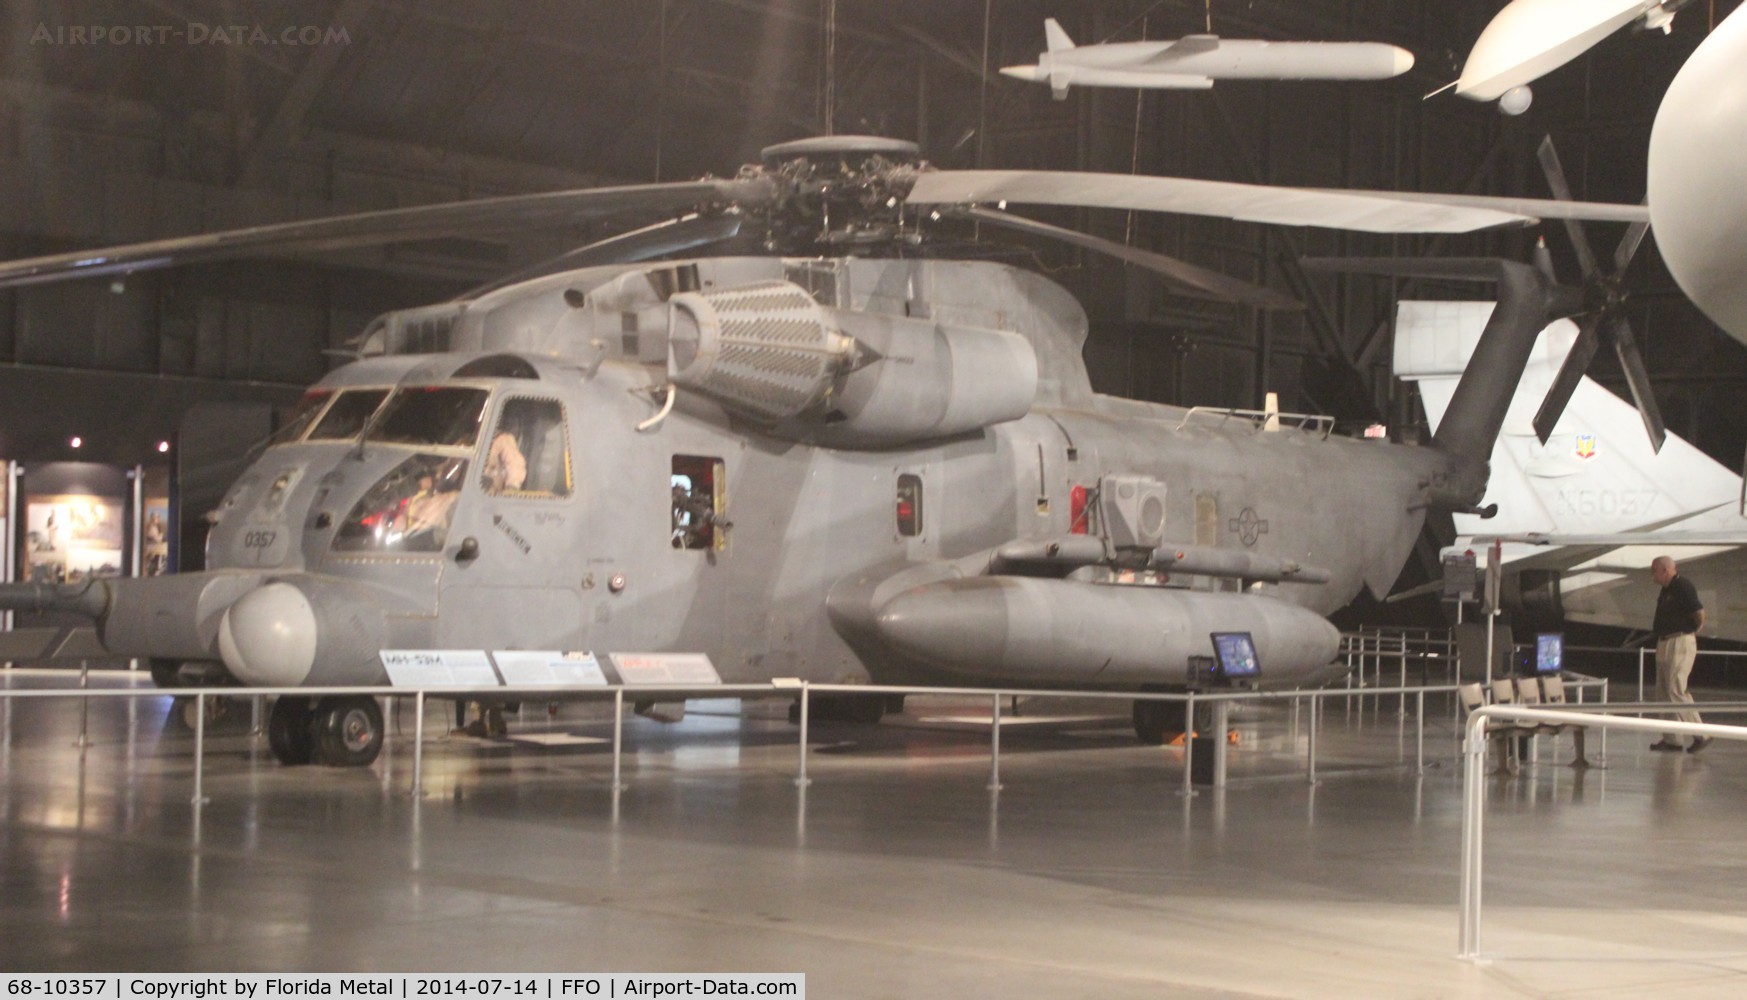 68-10357, 1968 Sikorsky MH-53M Pave Low IV C/N 65-173, MH-53M